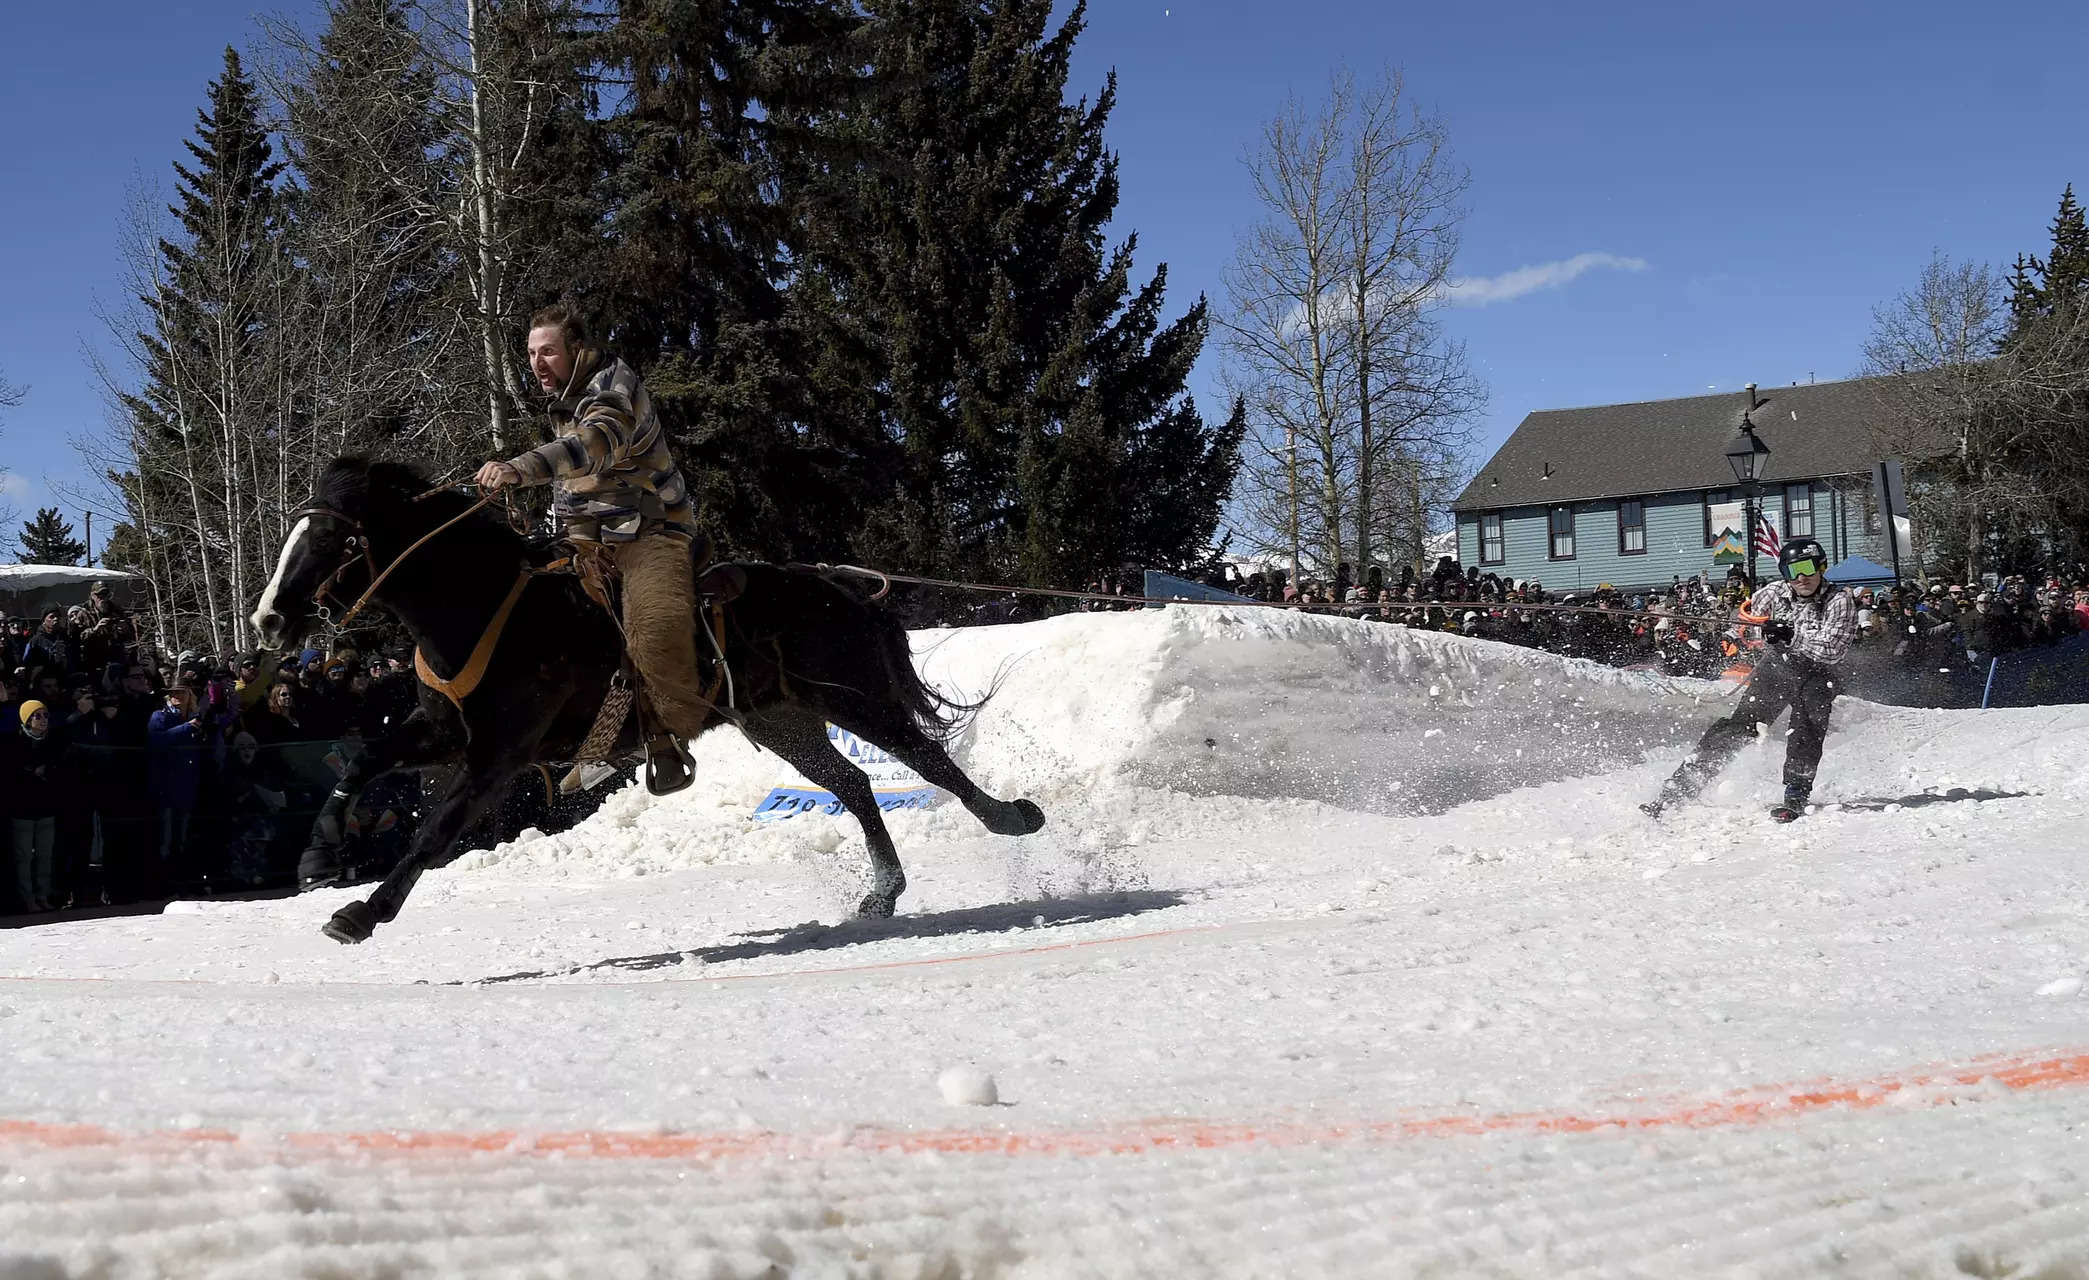 Is it skiing? Is it horse riding? No, it’s skijoring 